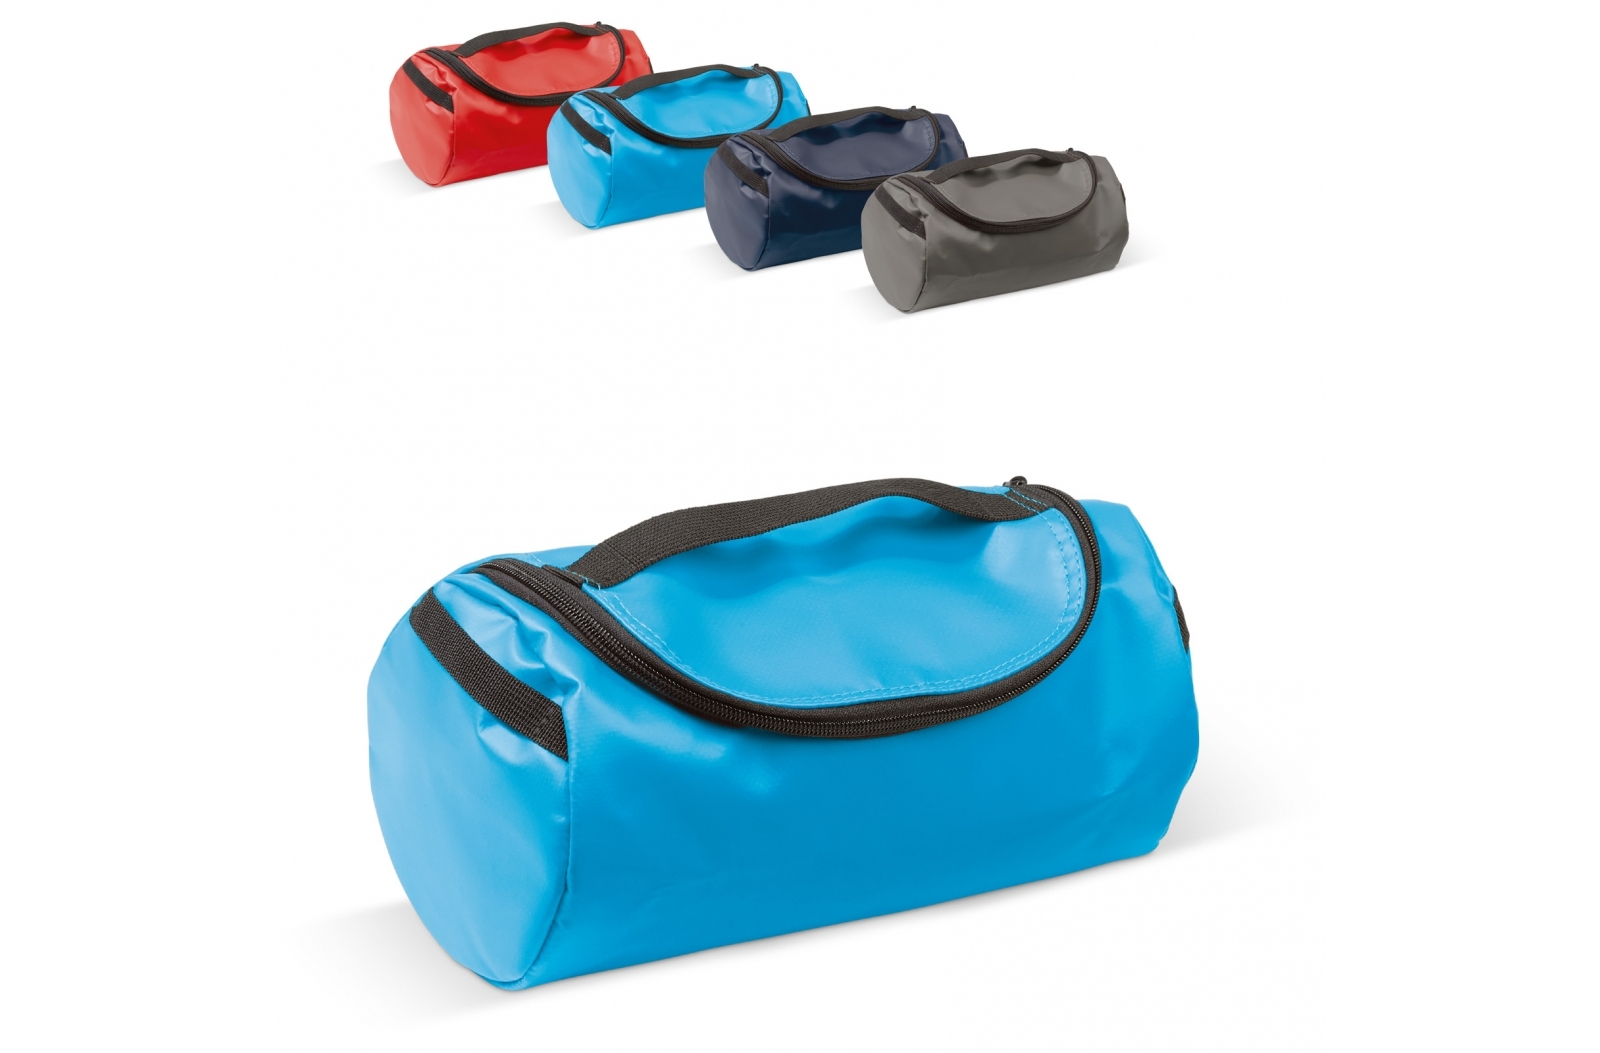 Toiletry Bag made of Sturdy Material - Beckley